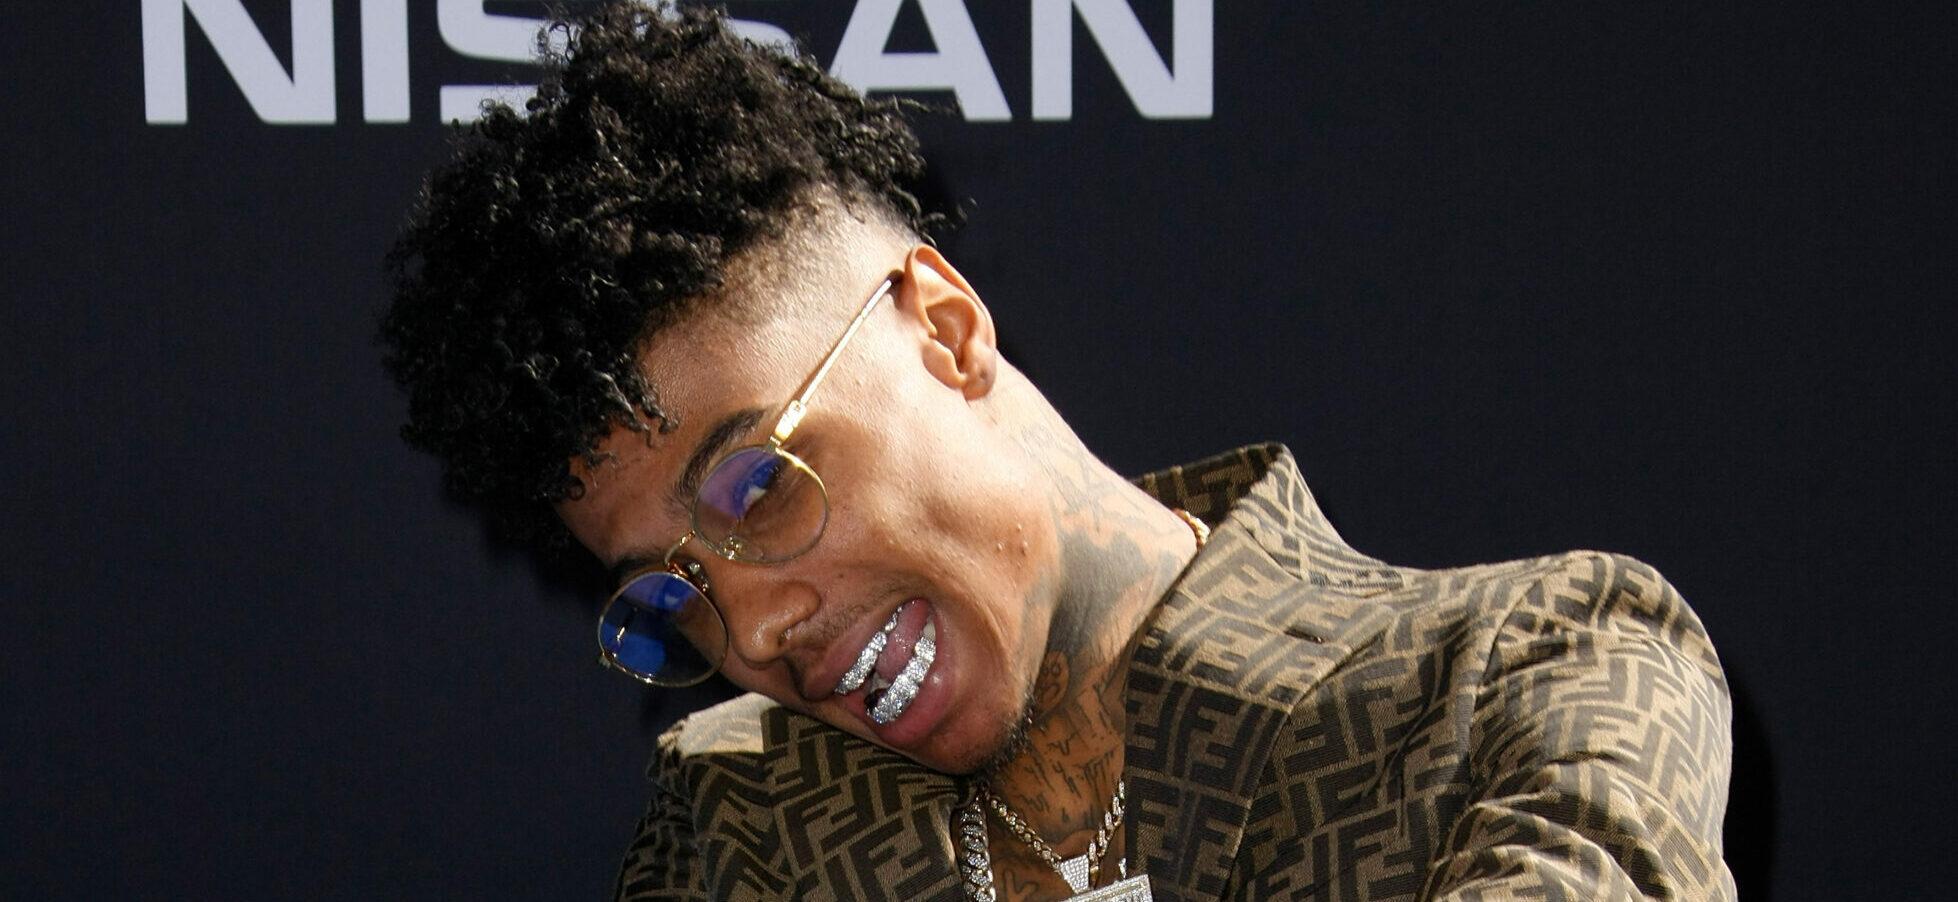 Real Reason Behind Rapper Blueface’s Alleged Las Vegas Shooting REVEALED